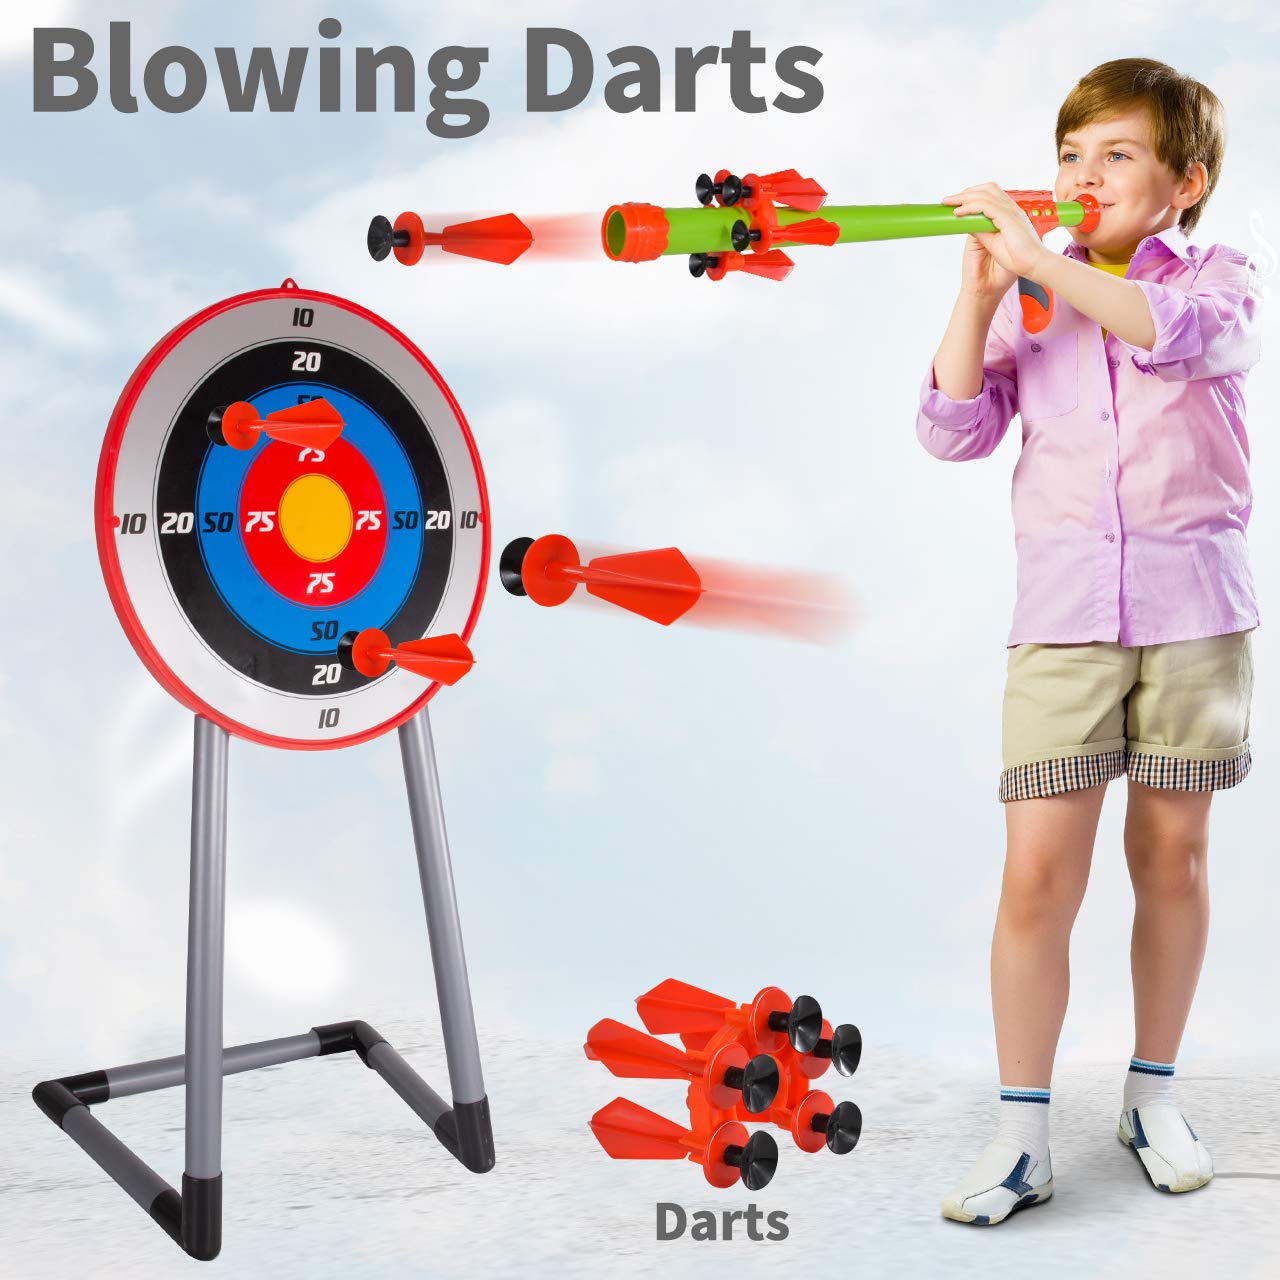 CAPTAIN CHAOWING Bow and Arrow for Kids, Archery Toy Set, 2 Bows & 1 Blowing Bow & 12 Arrows & 5 Quivers & Standing Target, Outdoor Toys for Children Boys Girls